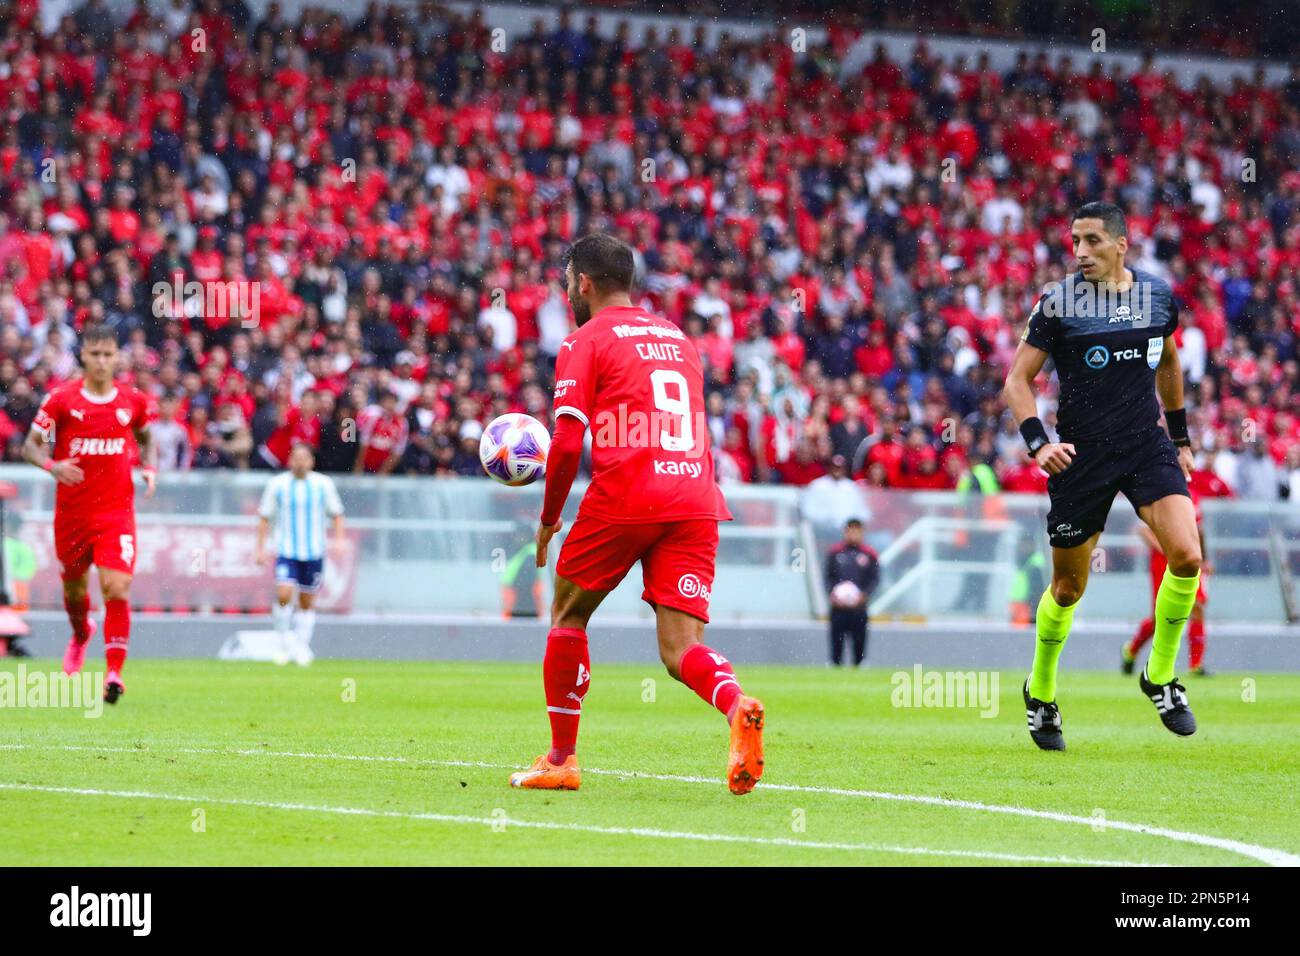 Lucas Albertengo of Independiente kicks the ball to score the first News  Photo - Getty Images